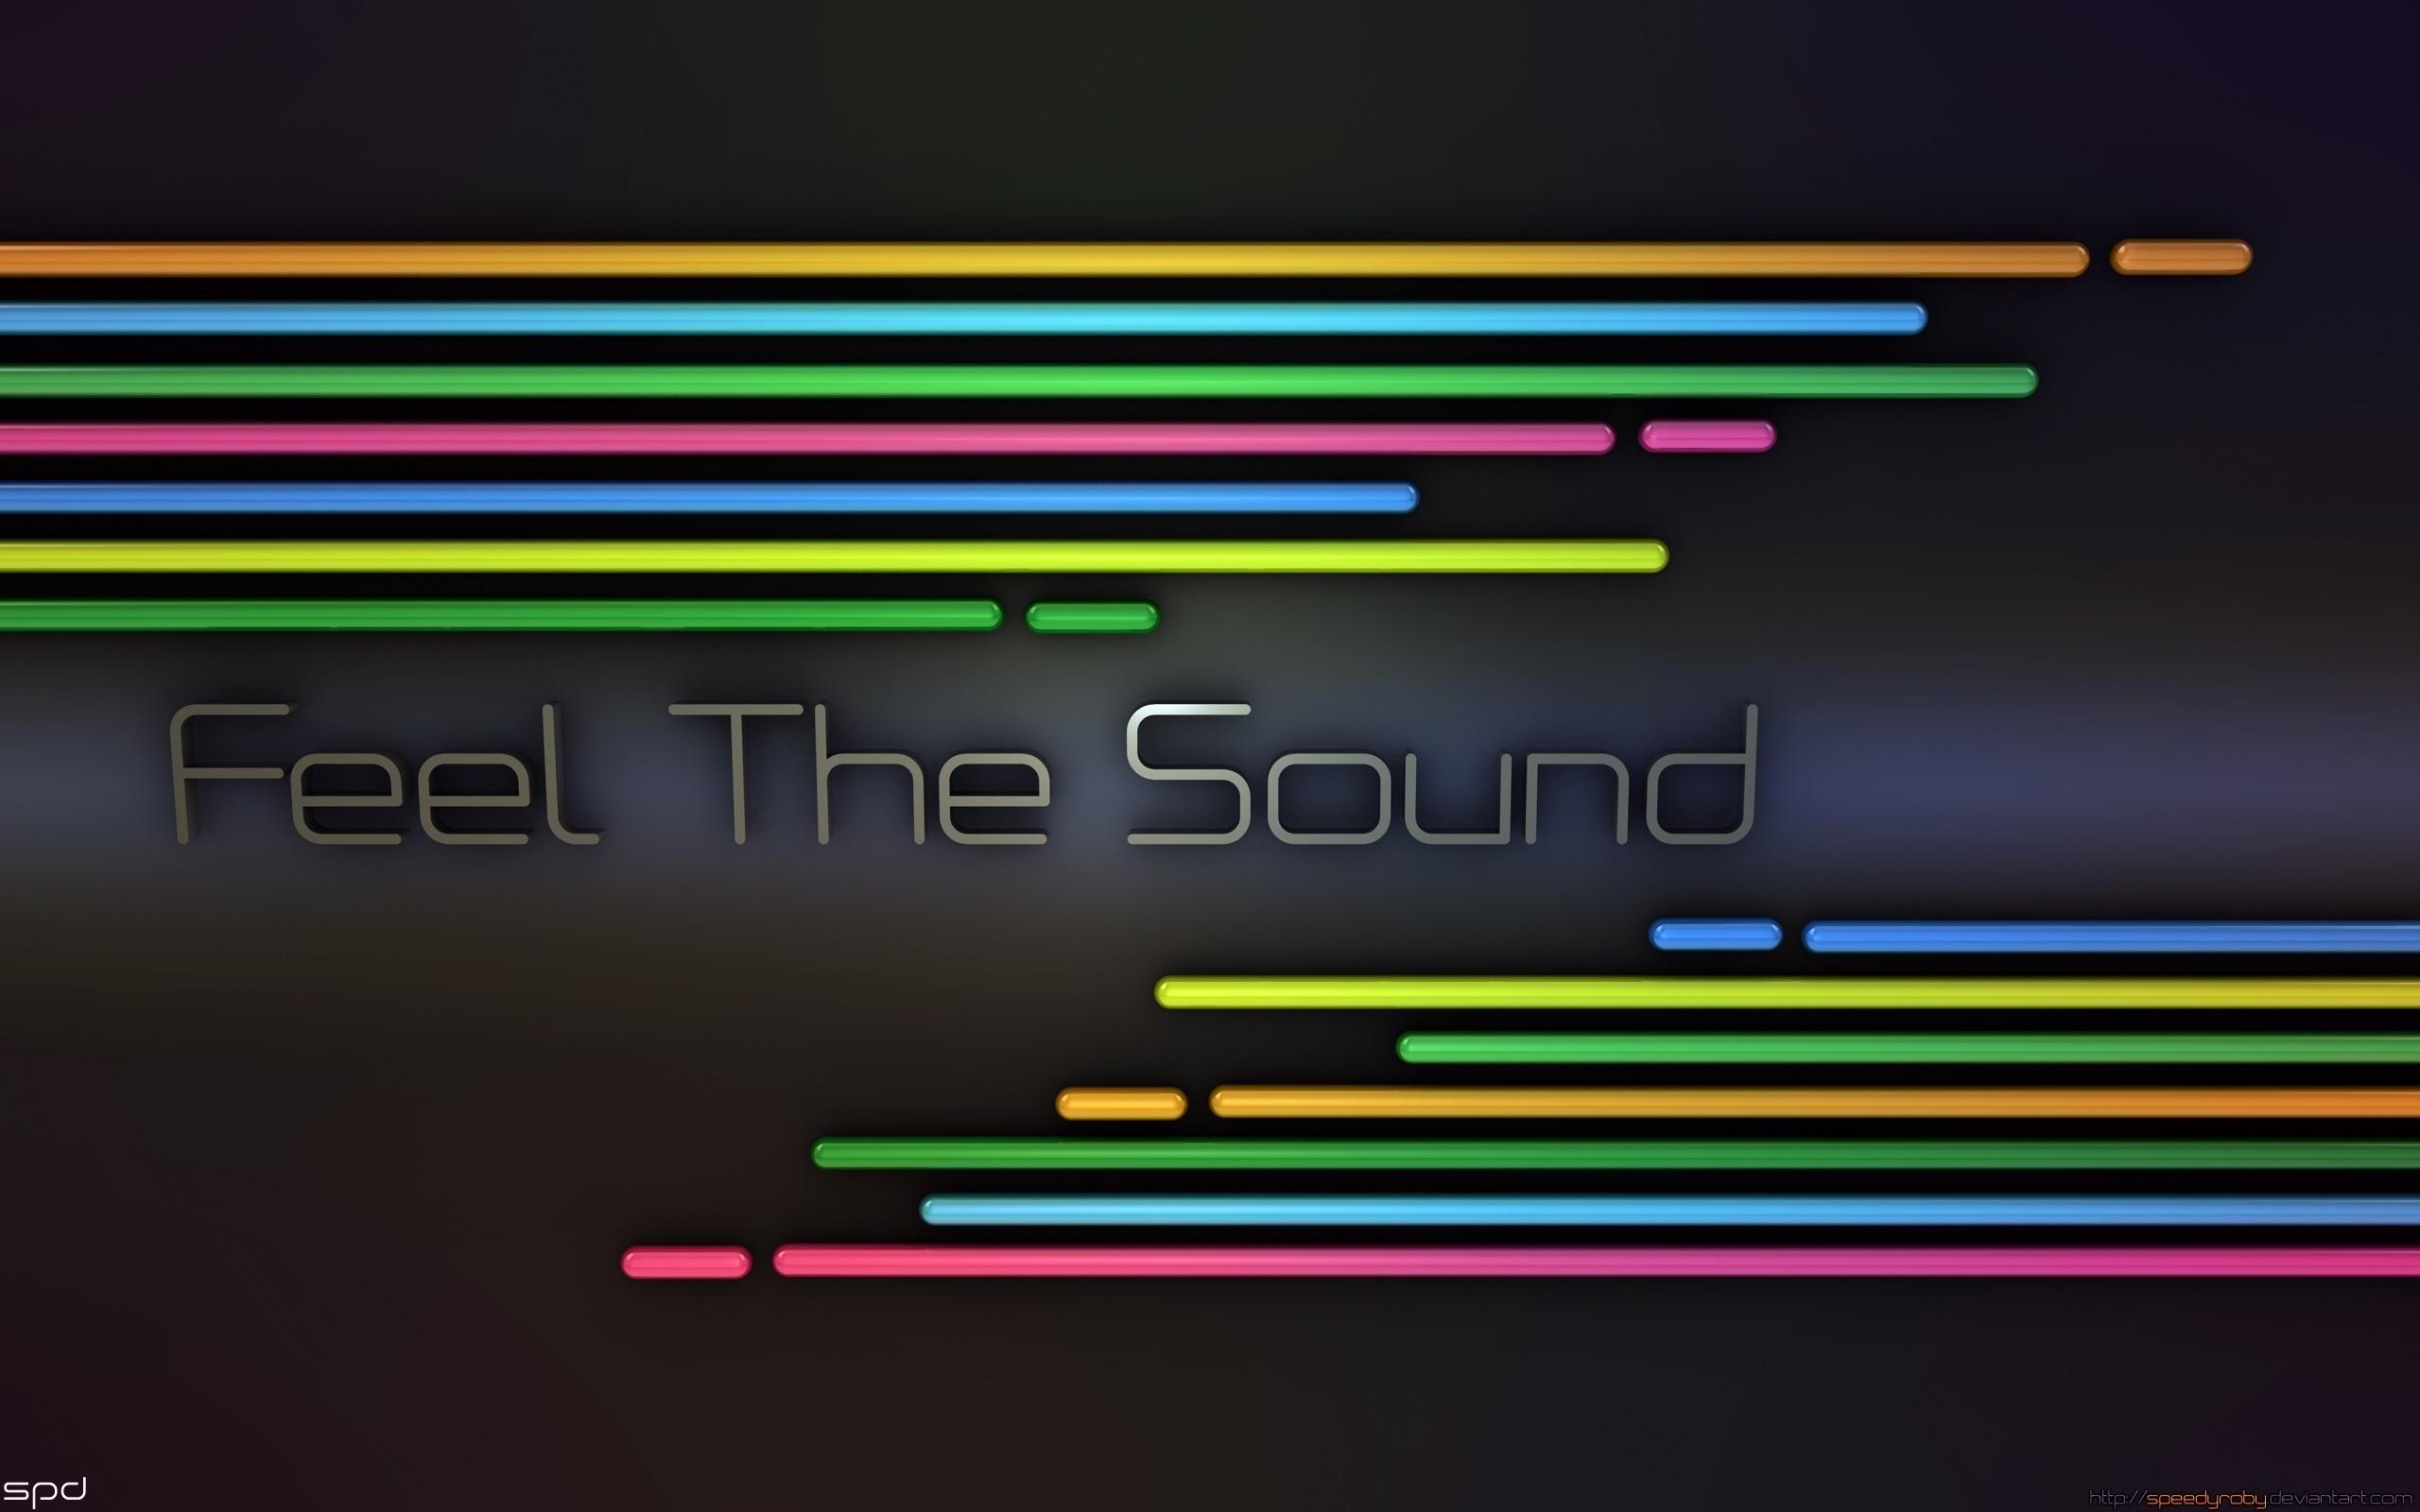 Feel The Sound wallpaper. Feel The Sound